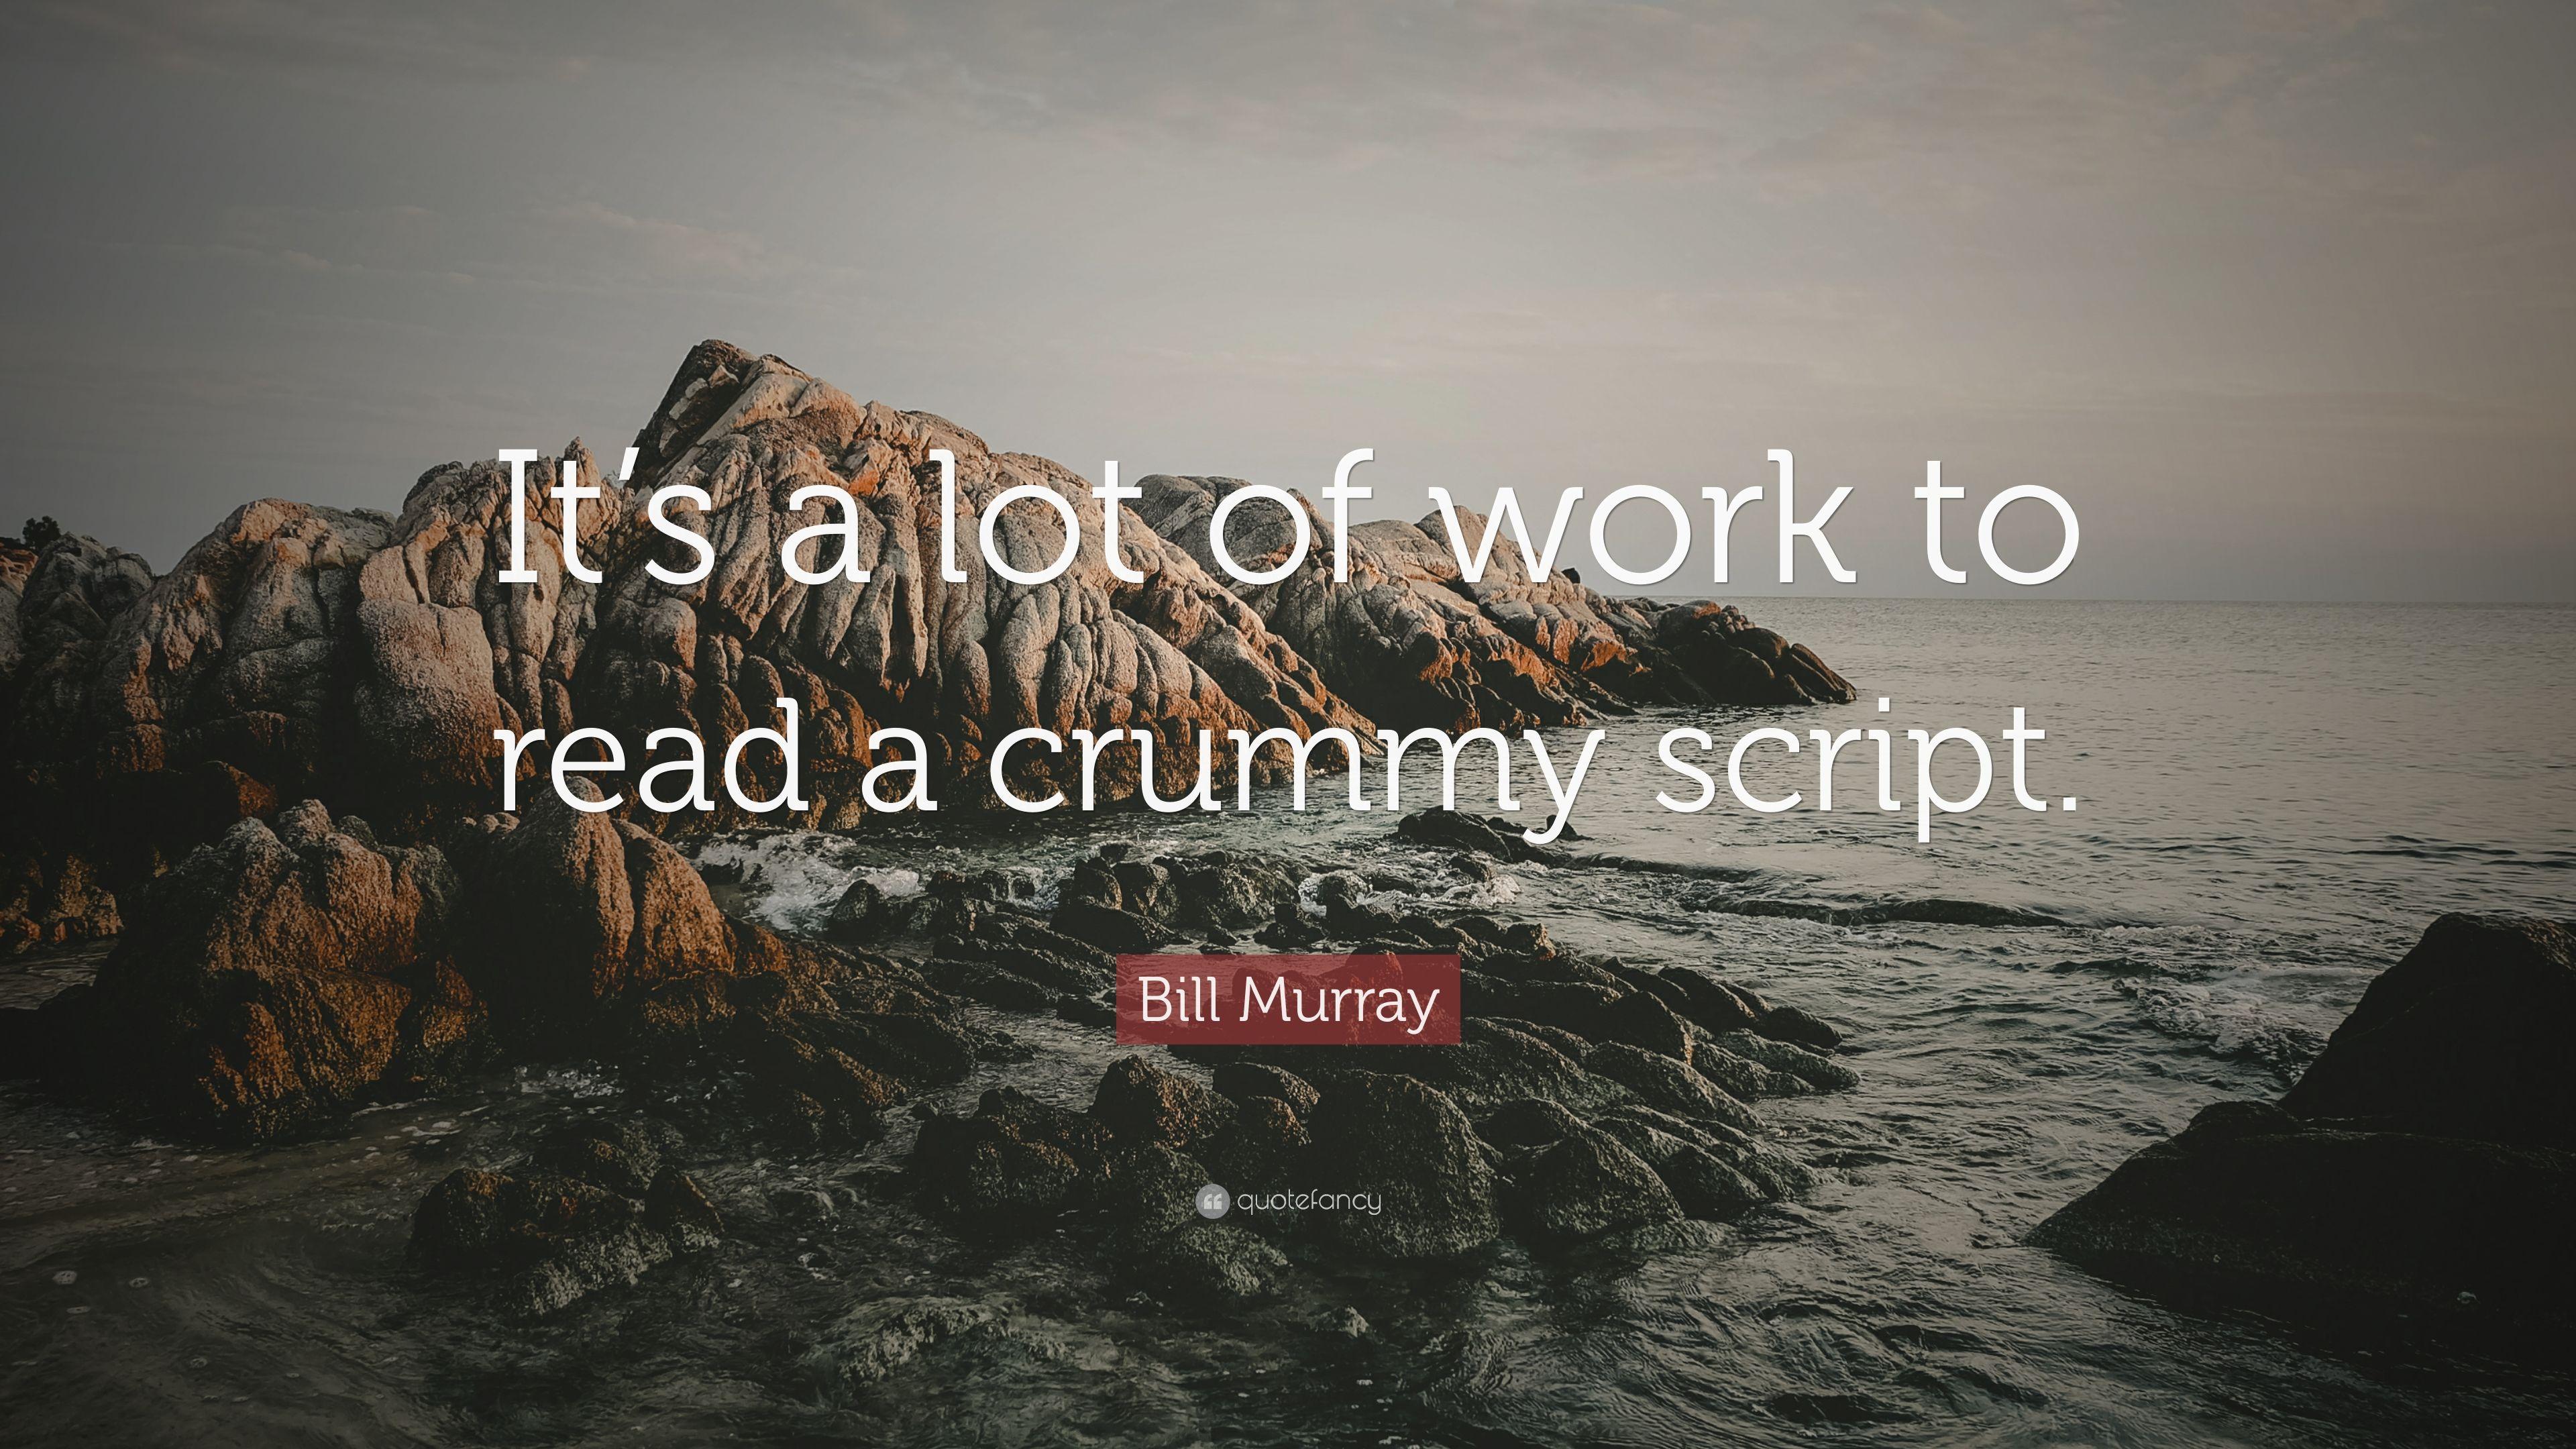 Bill Murray Quote: “It's a lot of work to read a crummy script